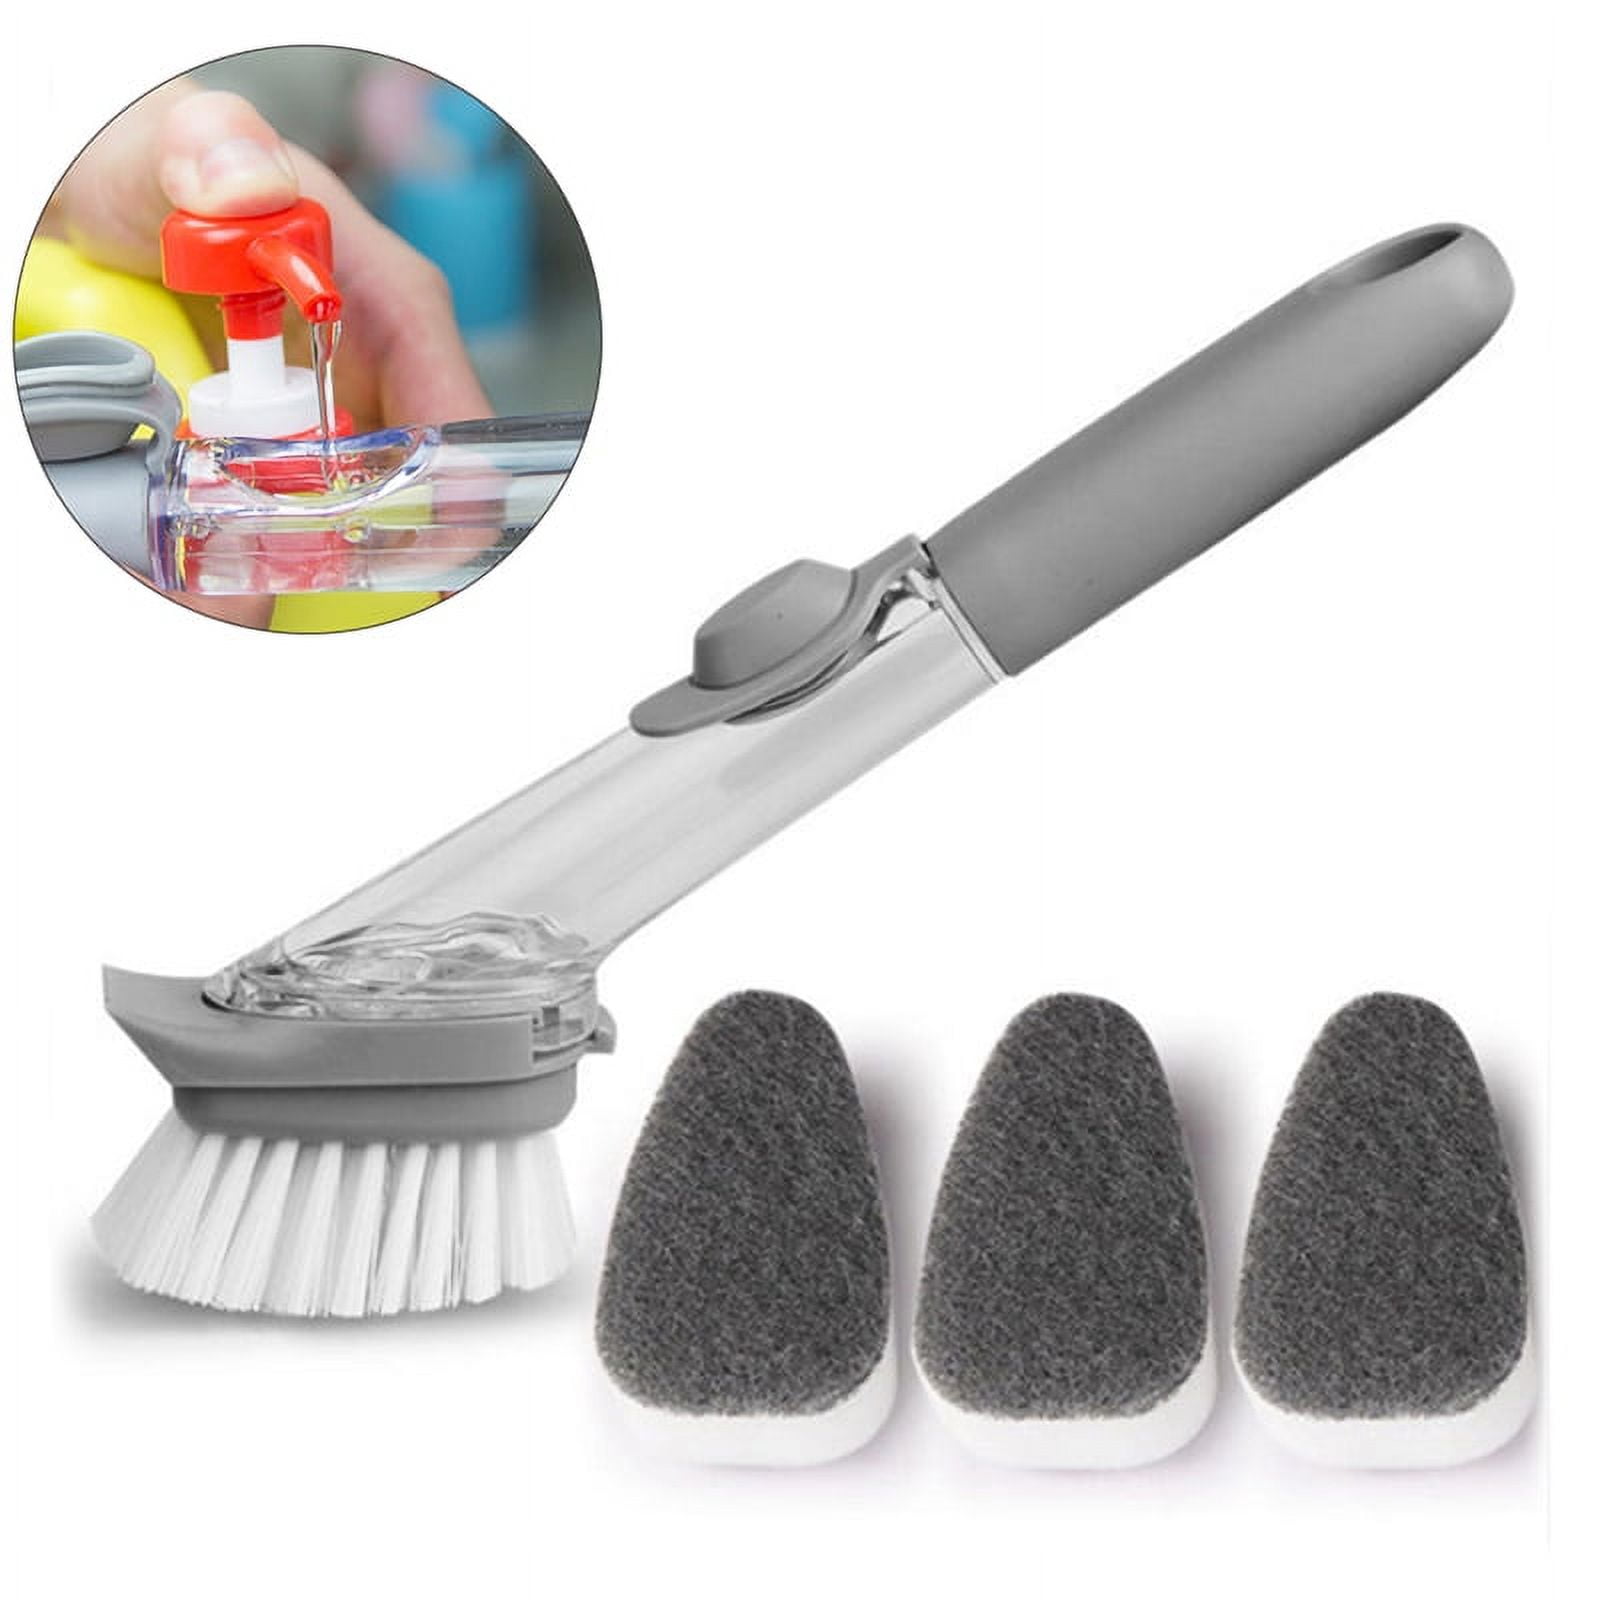 Delaware DURABLES Dish Wand Sponge Kitchen Set with Soap Dispenser-  Cleaning Supplies, Dish Brush with Handle, Scrub Brush with Long Handle,  Cleaning